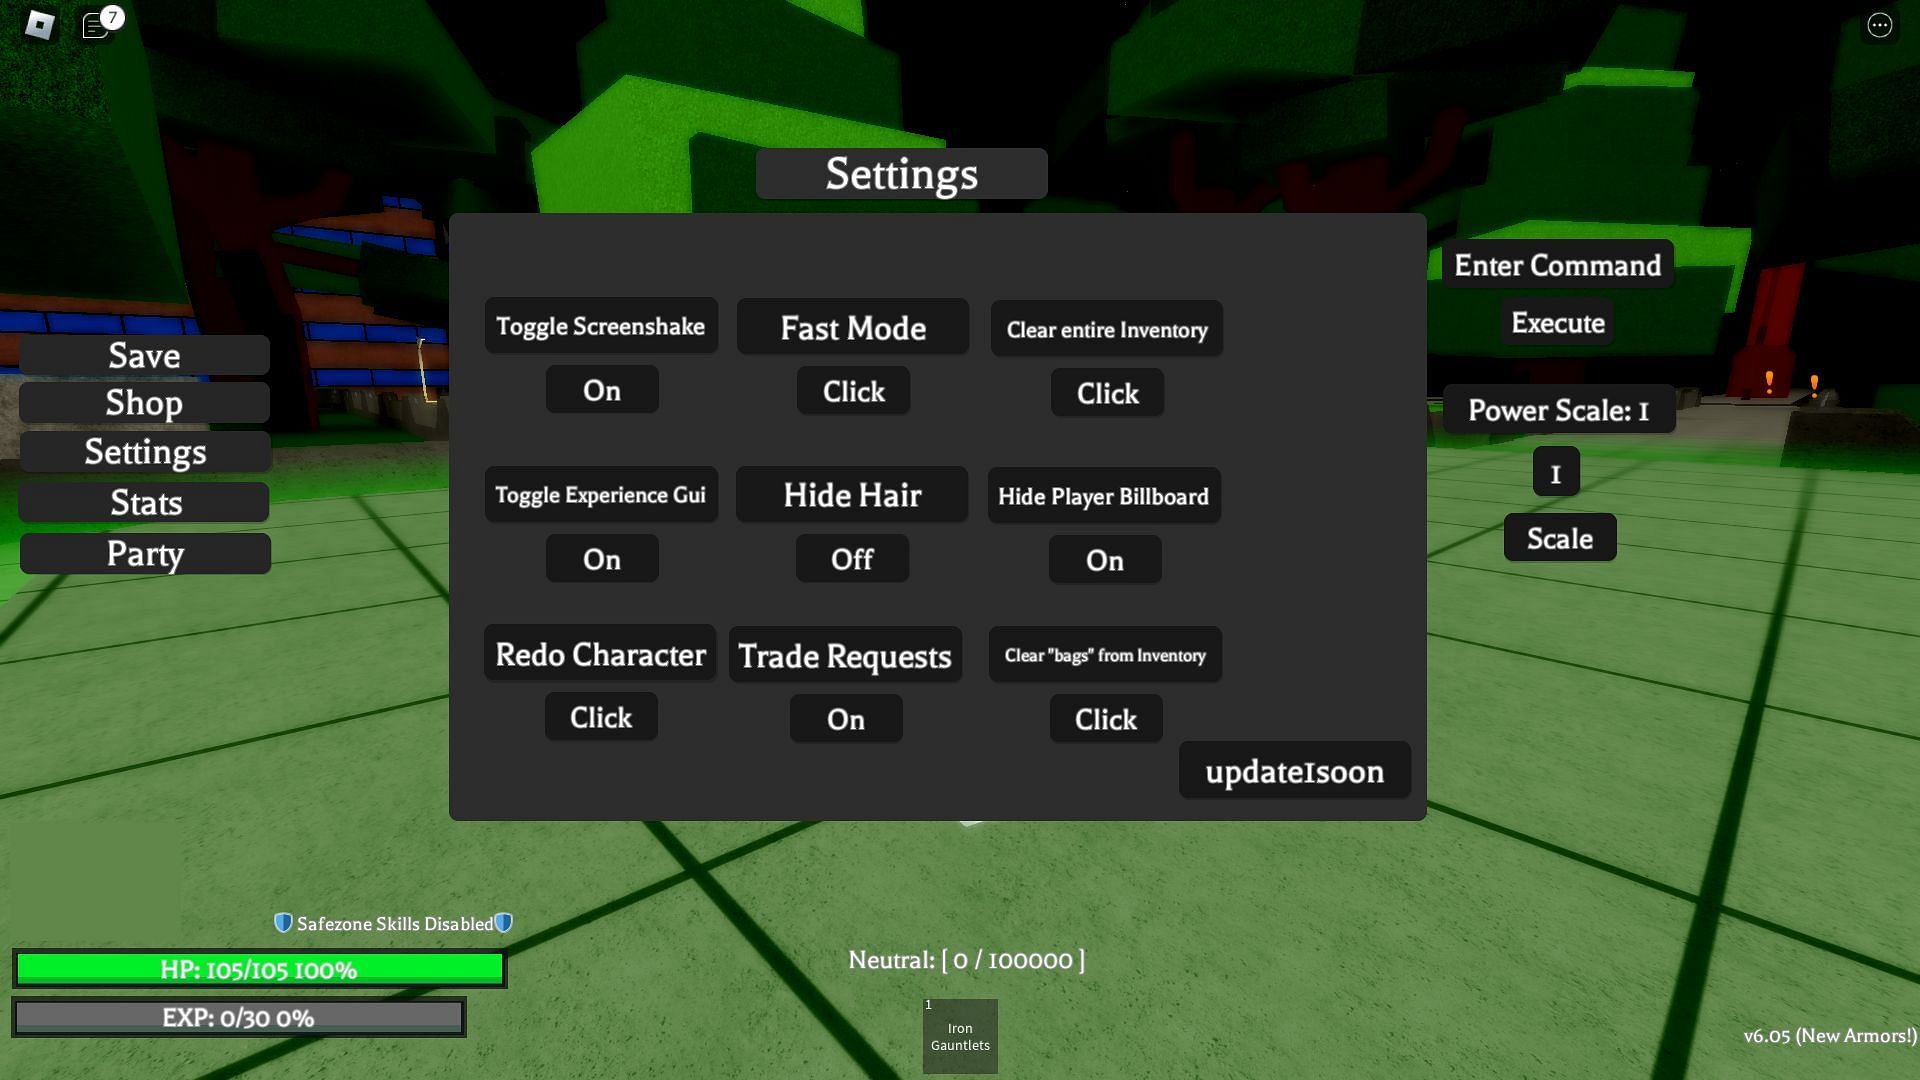 Troubleshooting codes for Project XL (Image via Roblox)